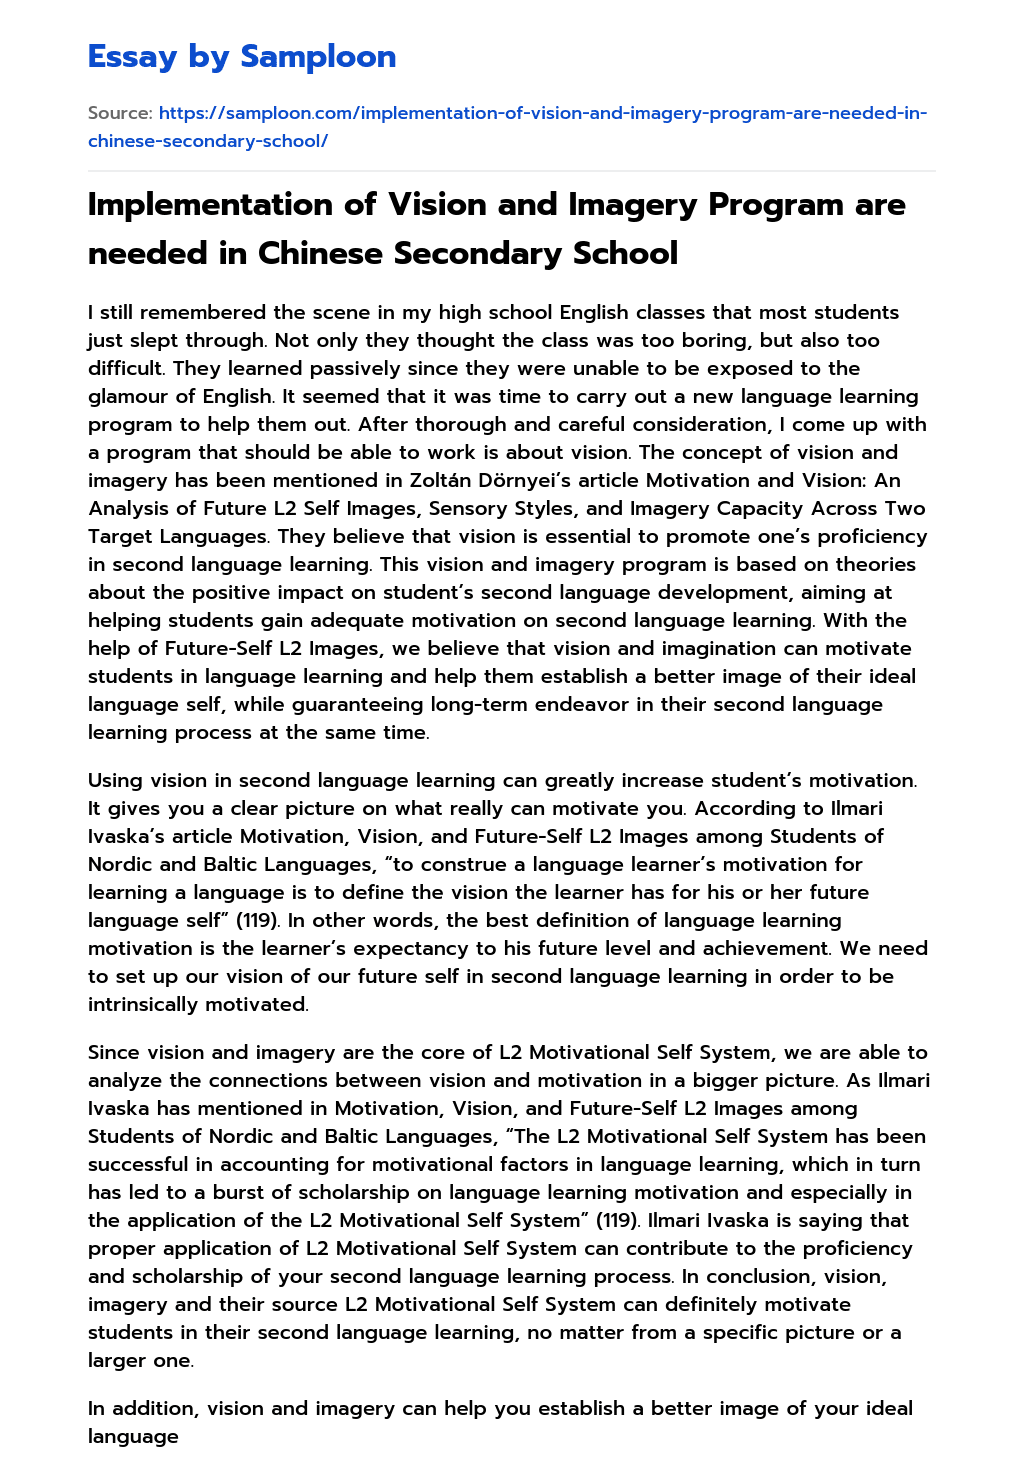 Implementation of Vision and Imagery Program are needed in Chinese Secondary School essay